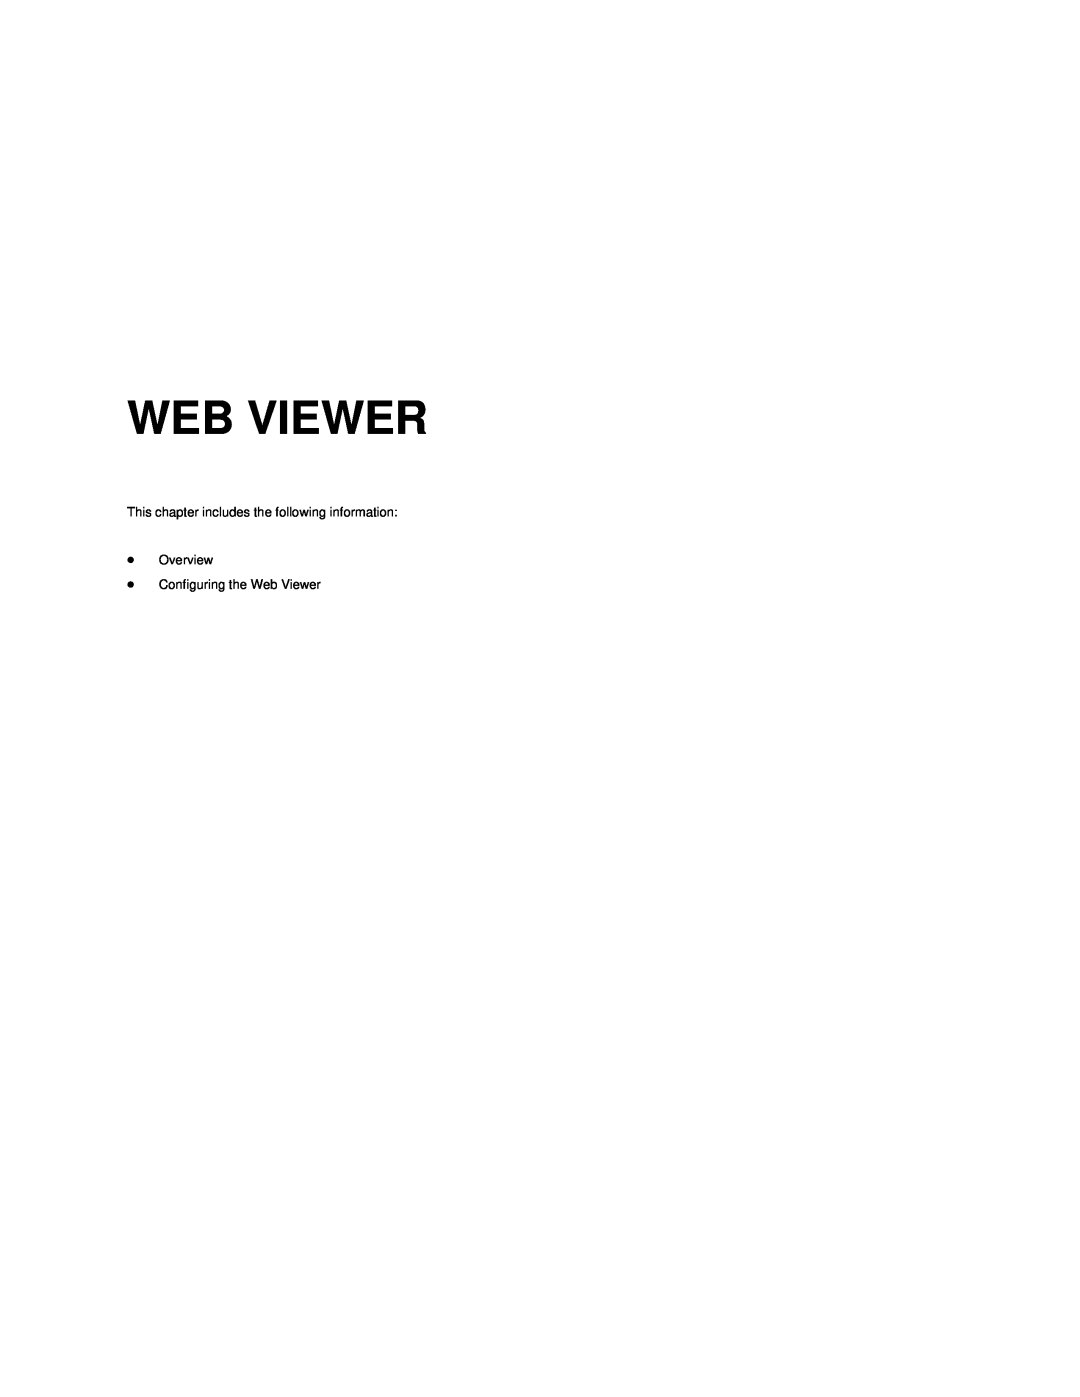 Toshiba NVS16-X, NVS32-X, NVS8-X This chapter includes the following information Overview, Configuring the Web Viewer 